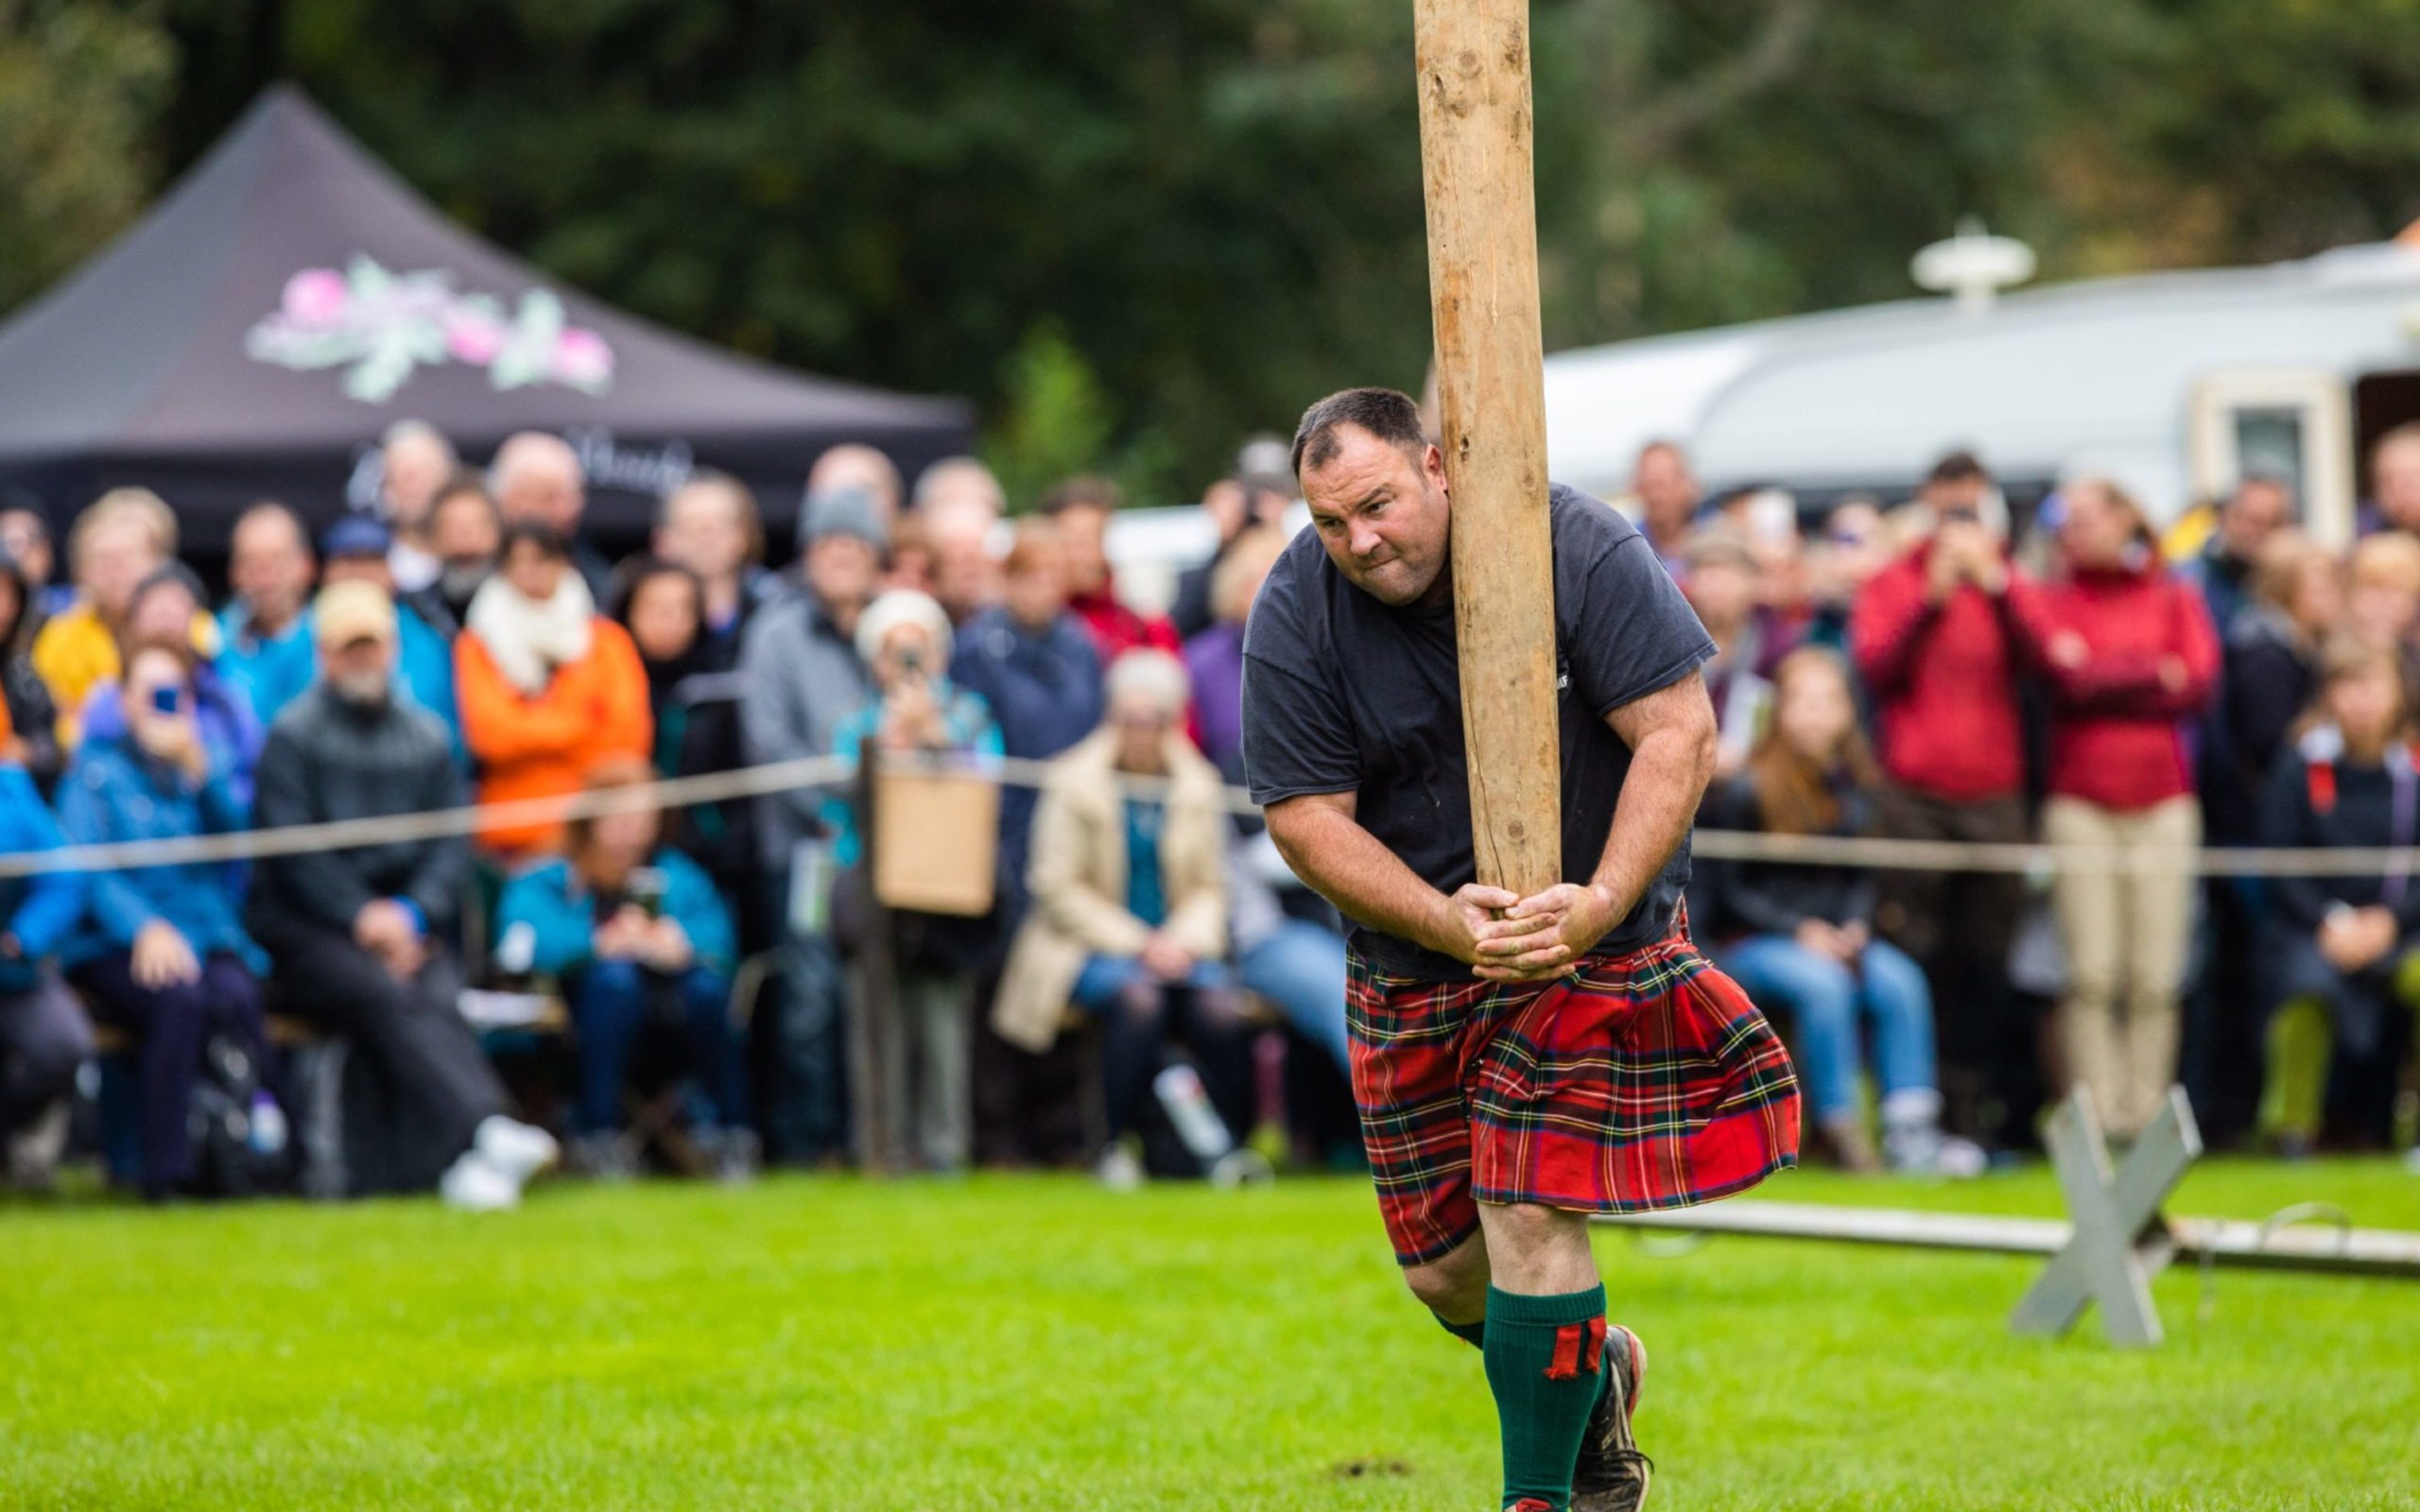 Highland Games training day invitation as summer events return following Covid-19 restrictions